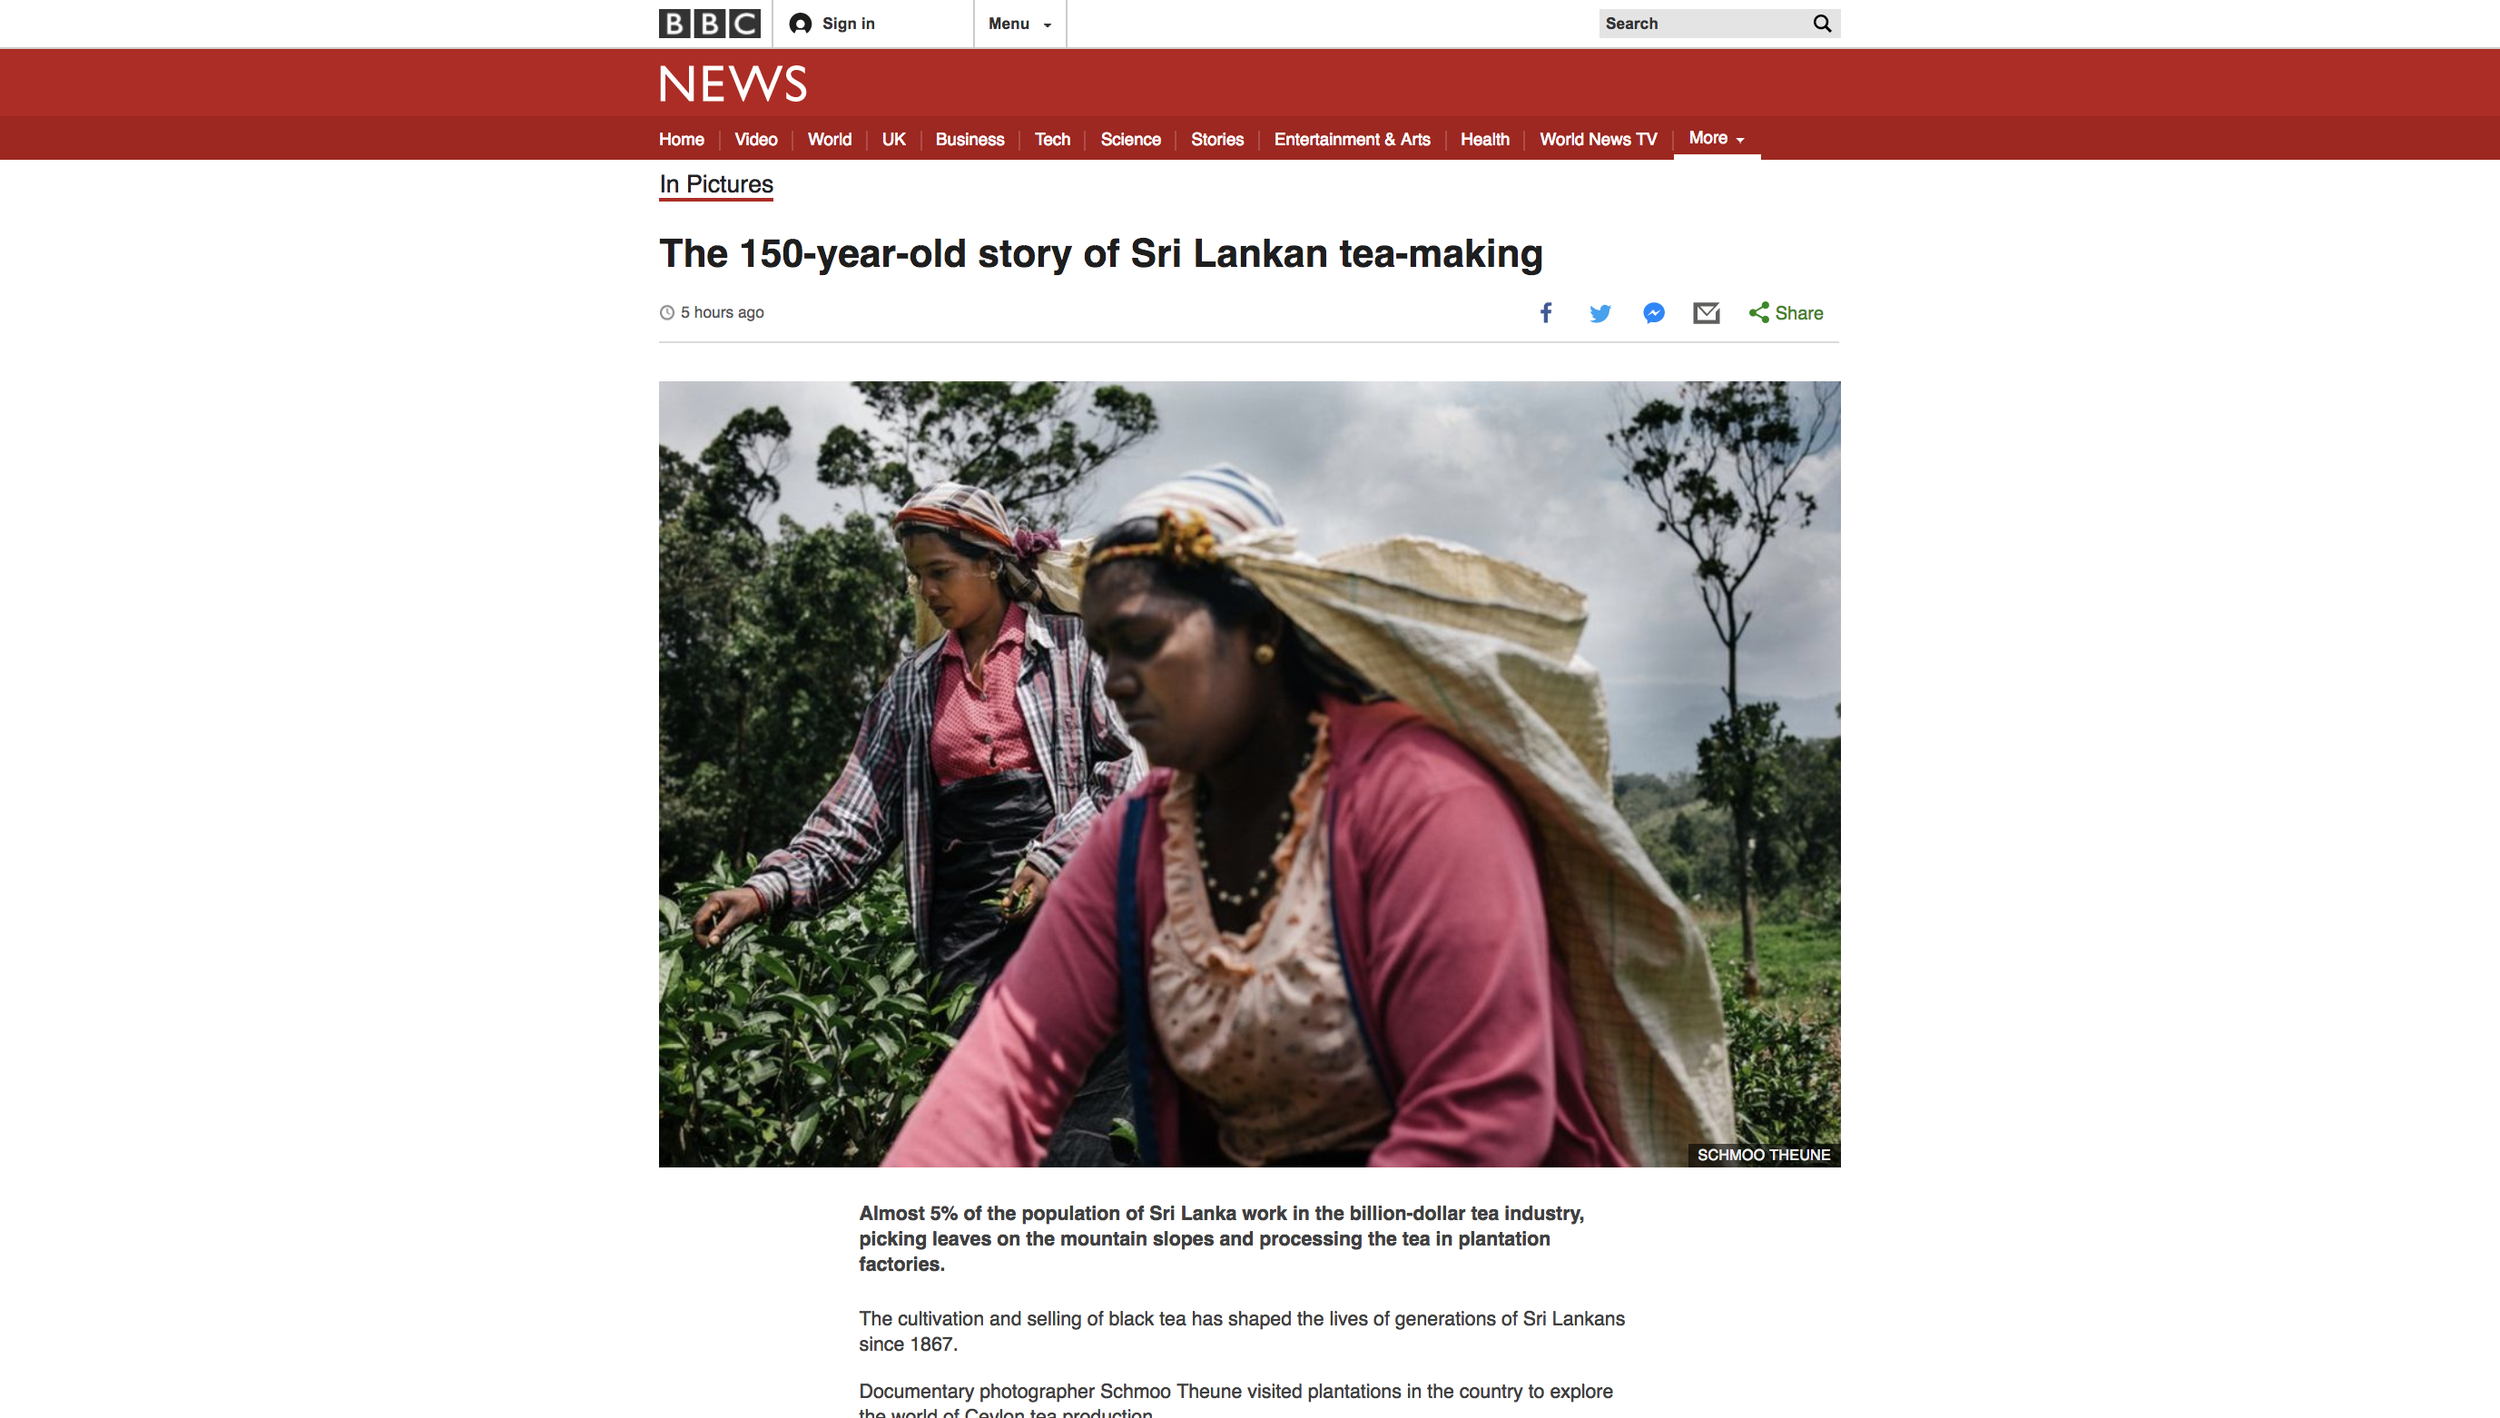 The_150-year-old_story_of_Sri_Lankan_tea-making_-_BBC_News.png